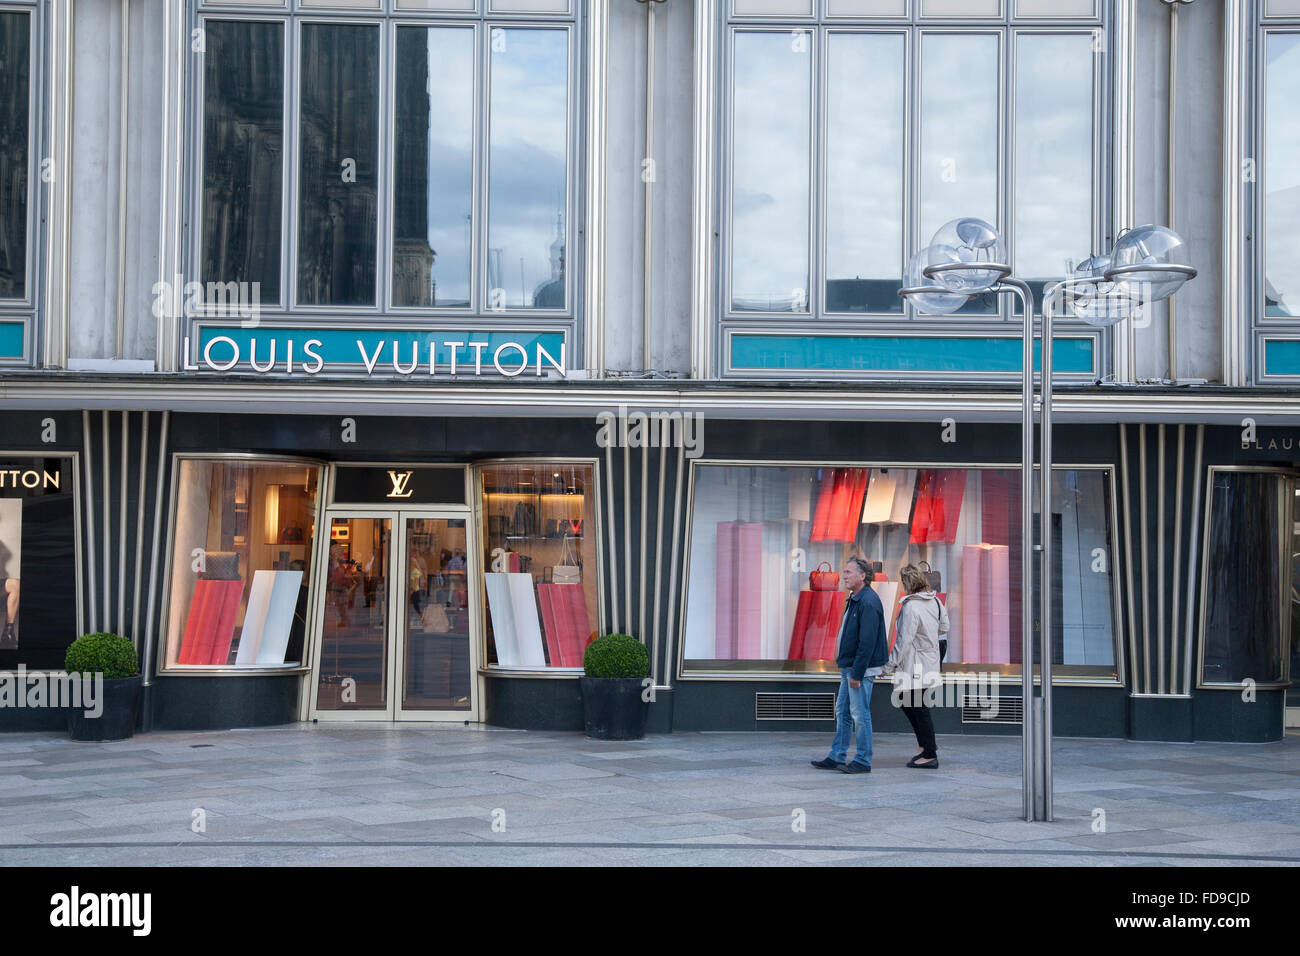 Louis Vuitton storefront in an upscale shopping district of Cologne  Germany. By contrast, the reflection of the Cologne Cathedral is visible in  the w Stock Photo - Alamy